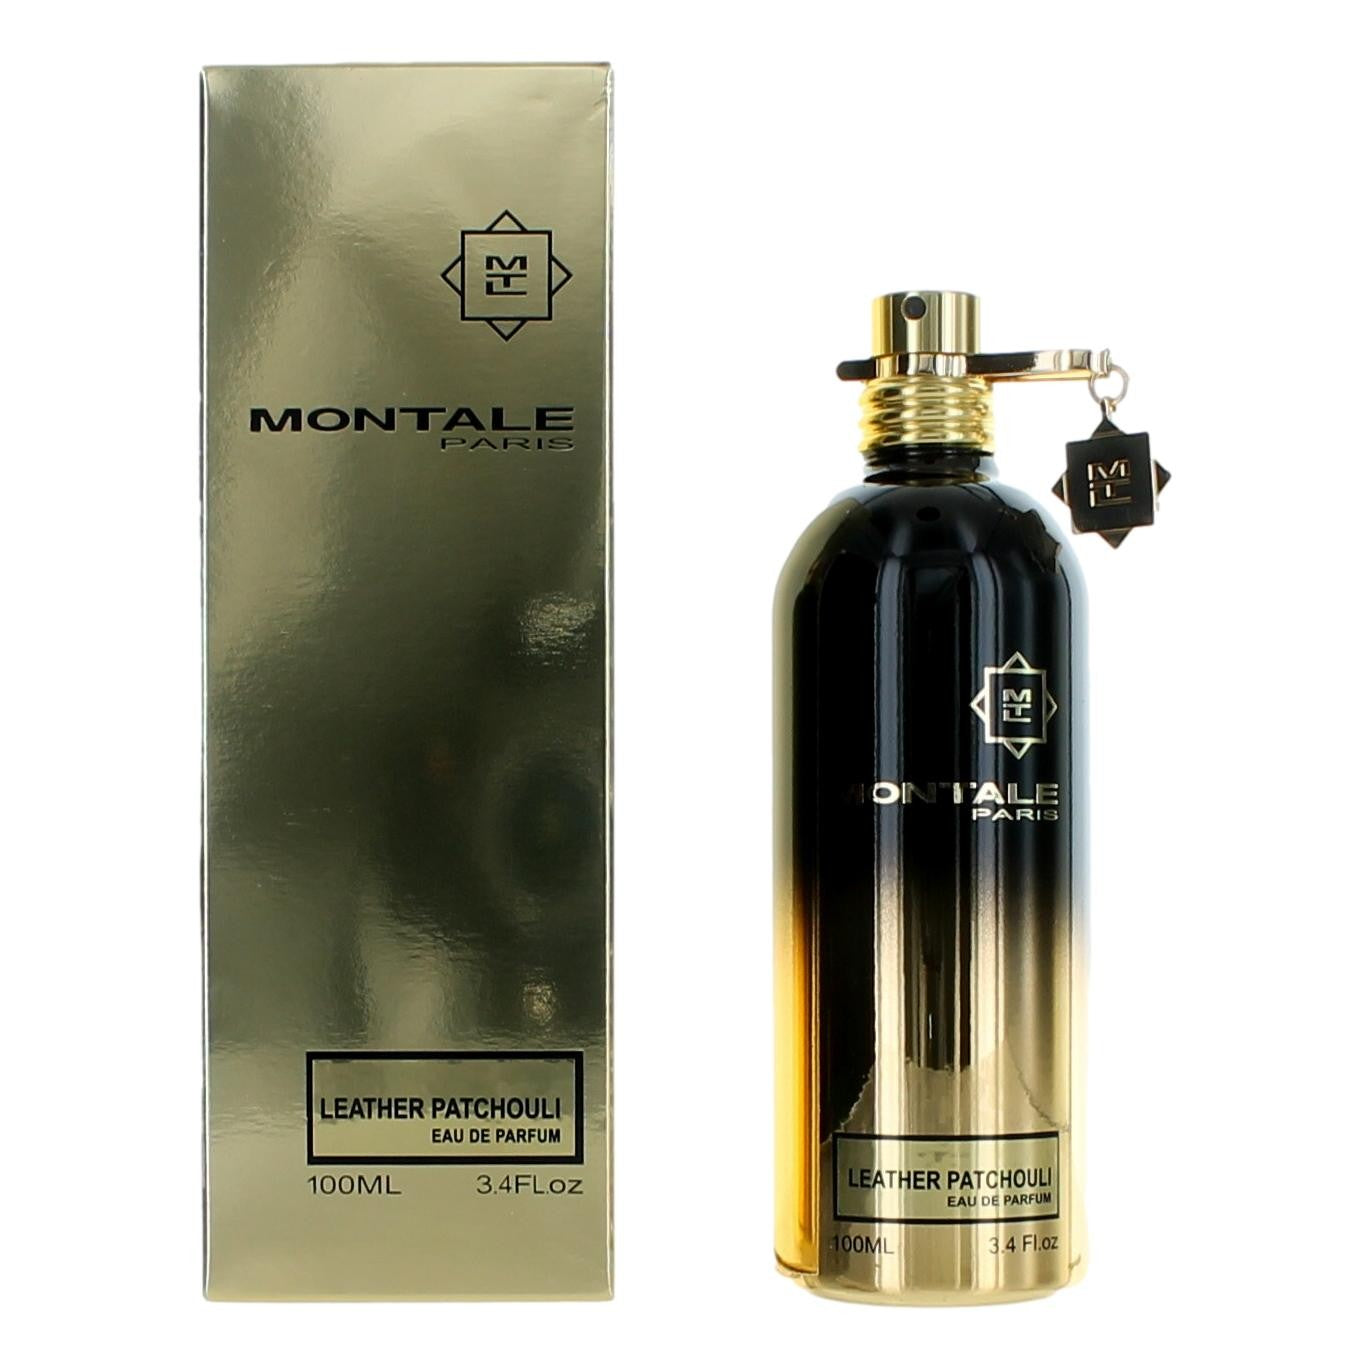 Montale Leather Patchouli by Montale